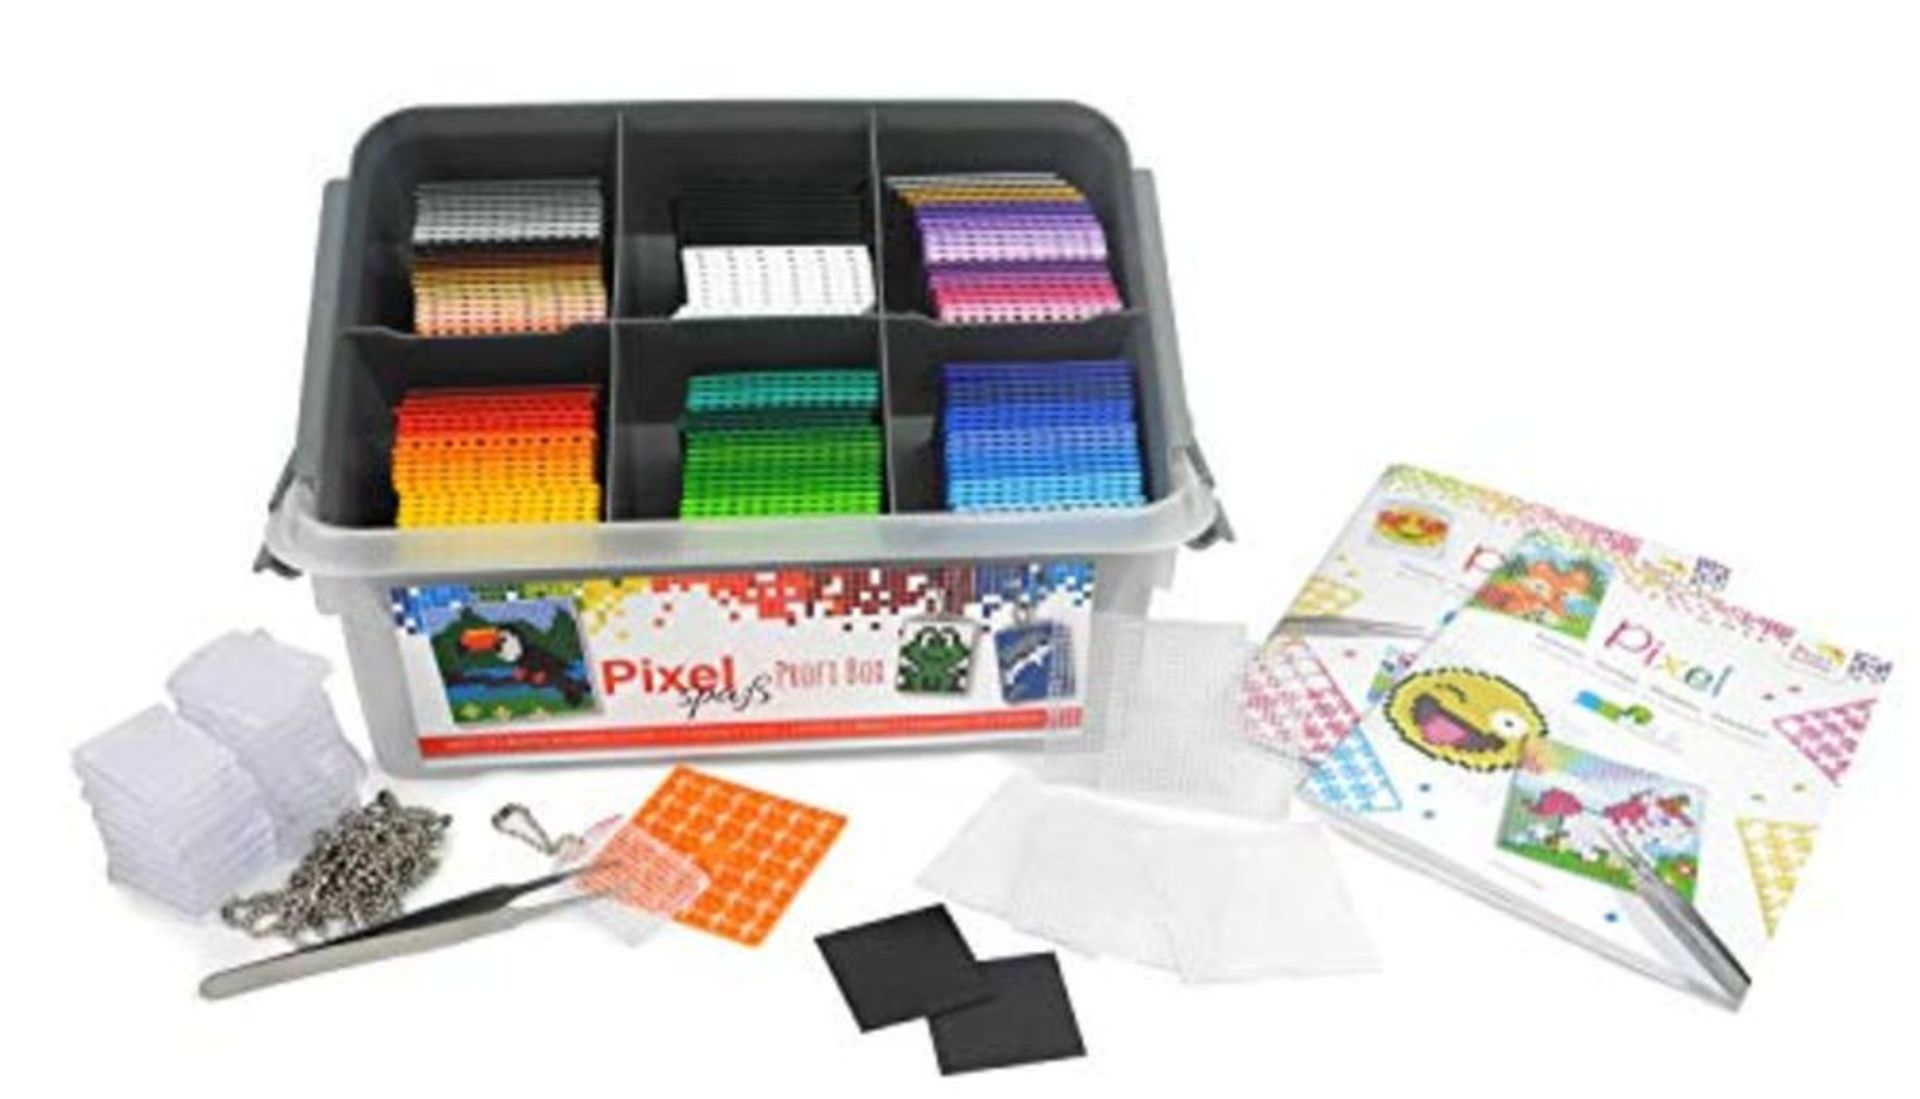 RRP £100.00 Pracht Creatives Hobby P60002-29501 Professional Box Craft Set with 126 Pixel, 24 Meda